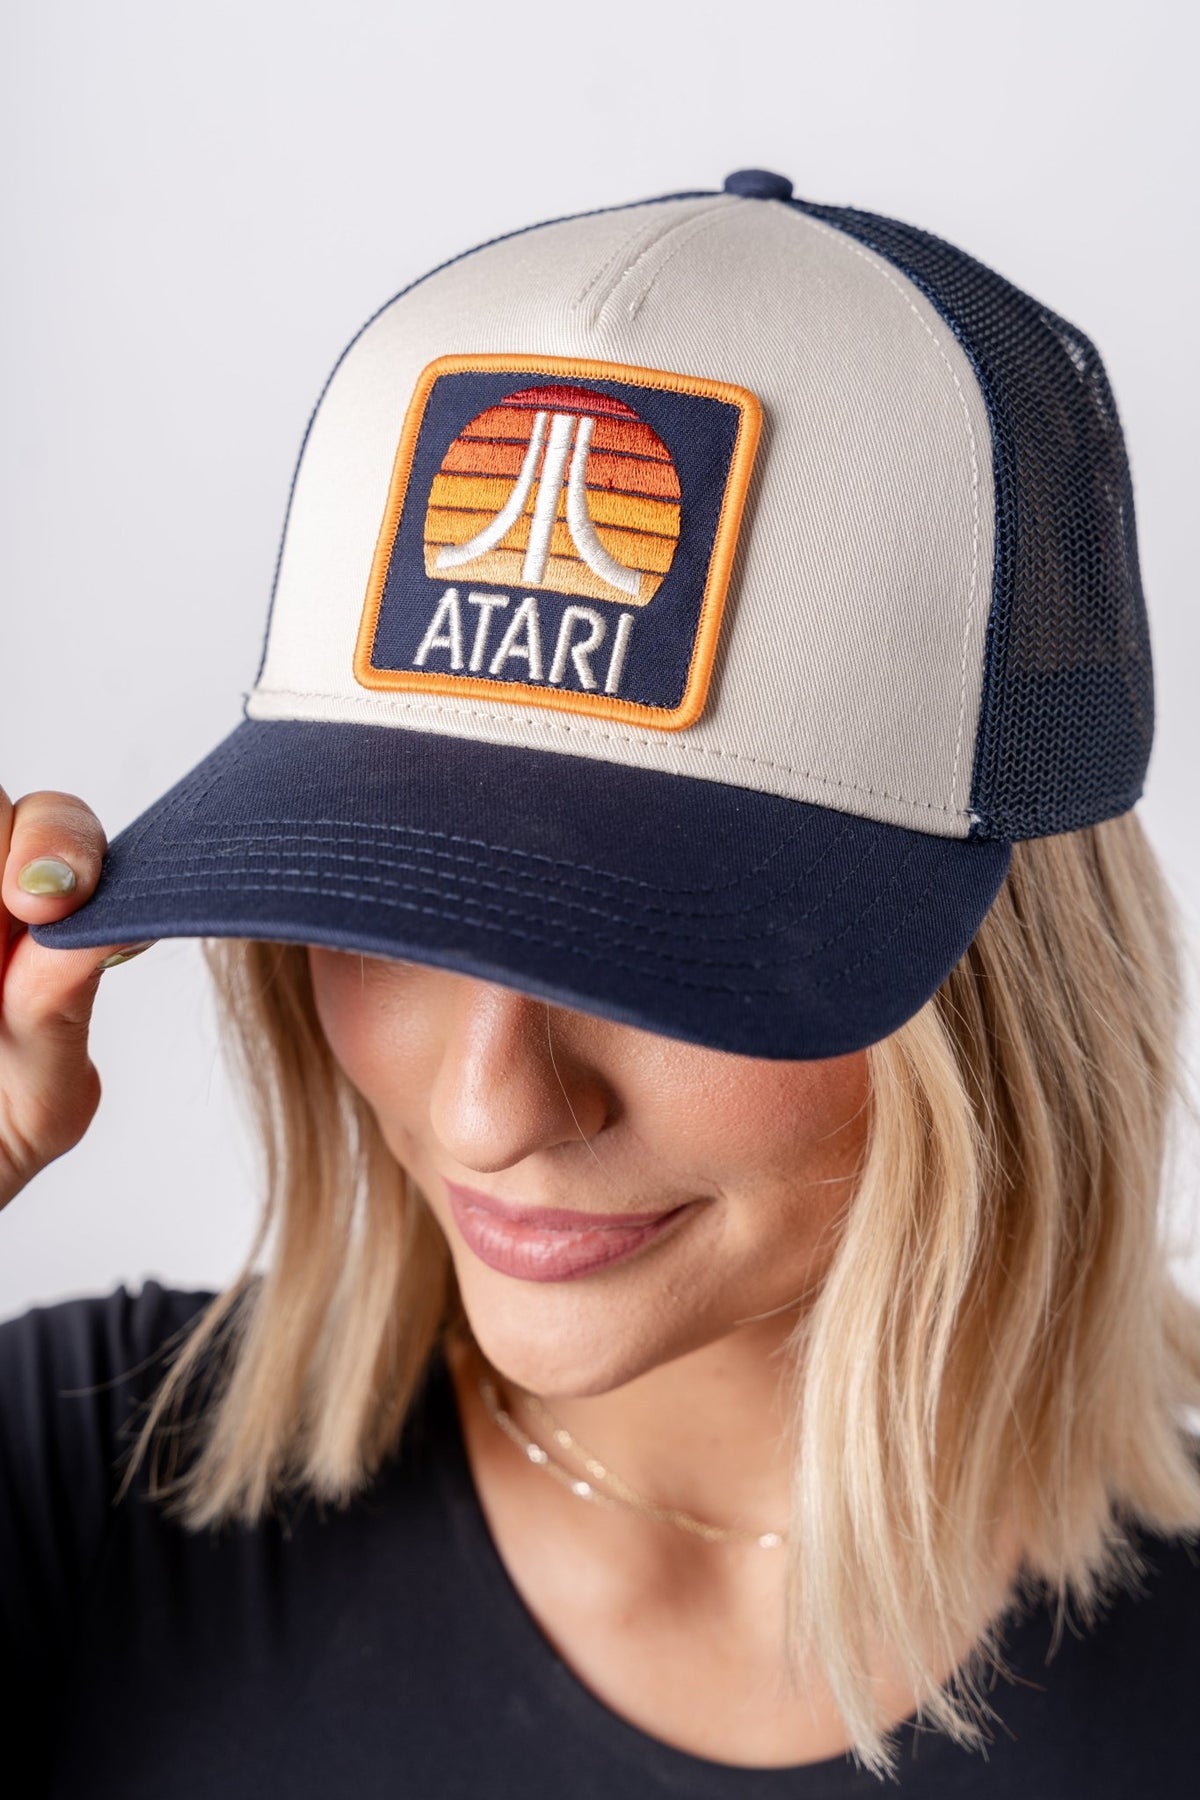 Atari twill valin patch hat navy - Trendy Gifts at Lush Fashion Lounge Boutique in Oklahoma City